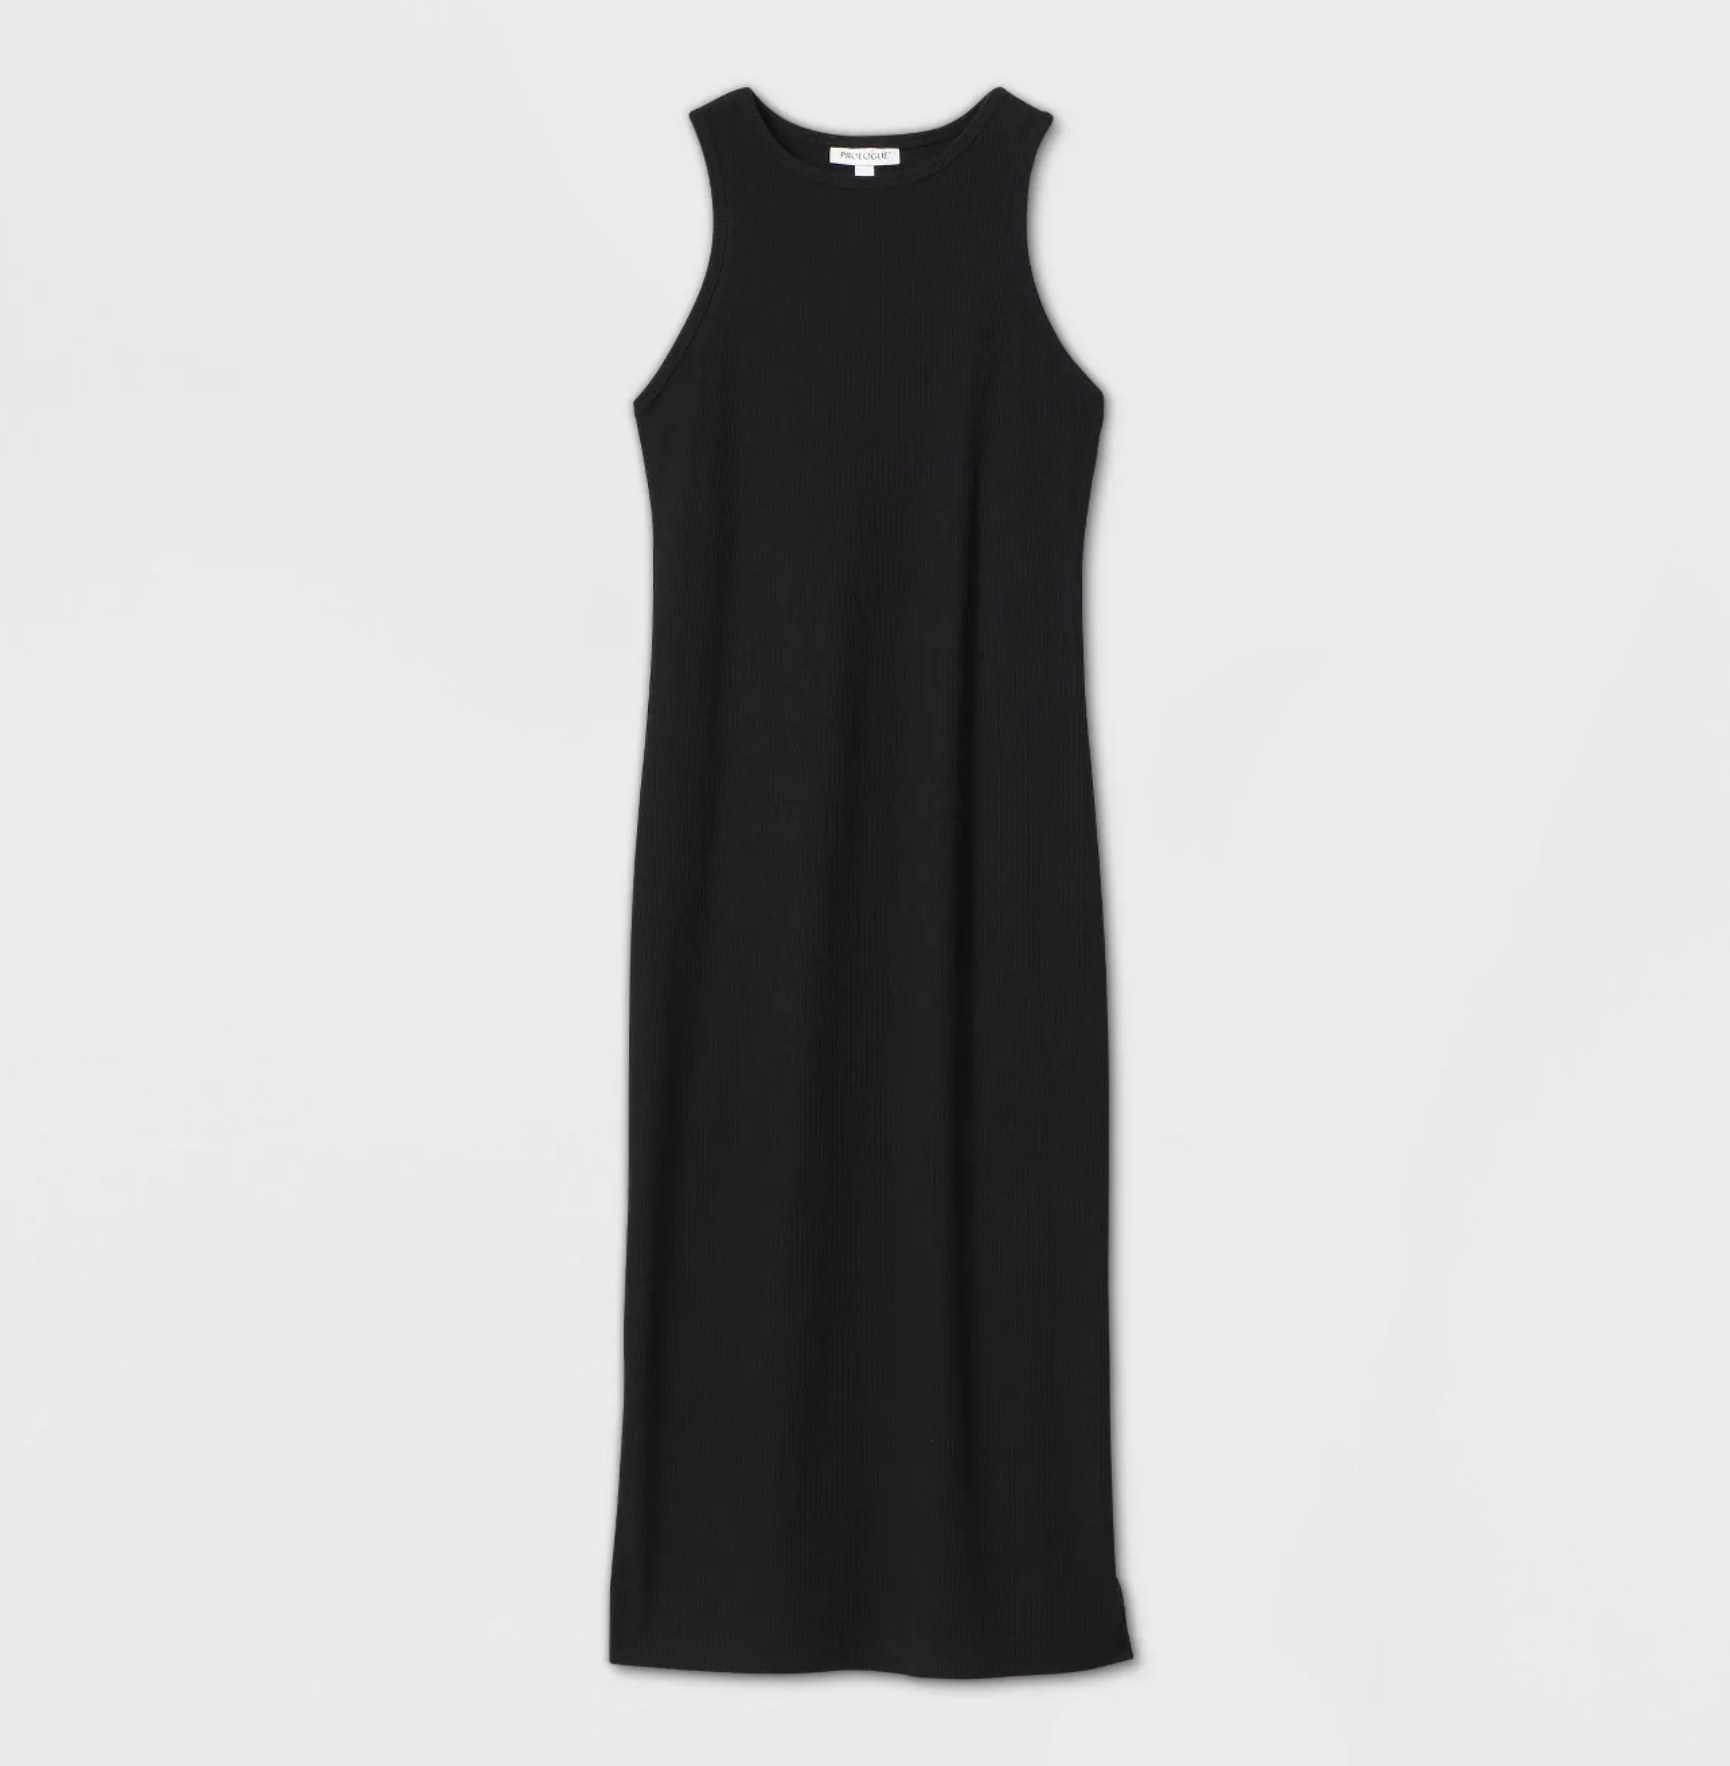 Black sleeveless dress with high-neck detailing and an ankle-length shape